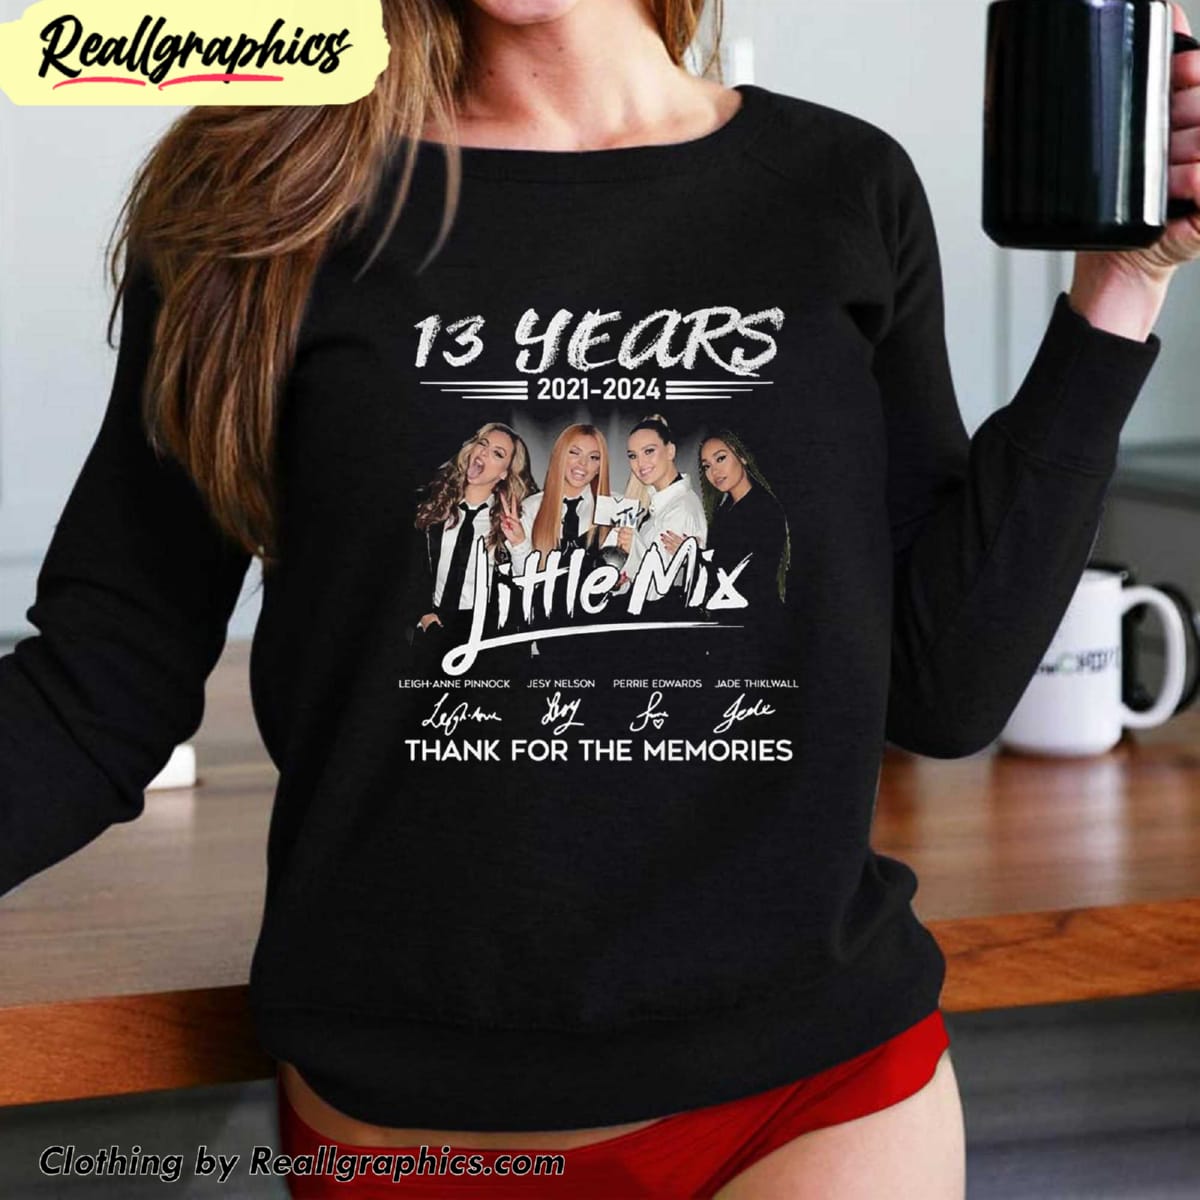 13-years-2021-2024-little-mix-thank-you-for-the-memories-shirt-2